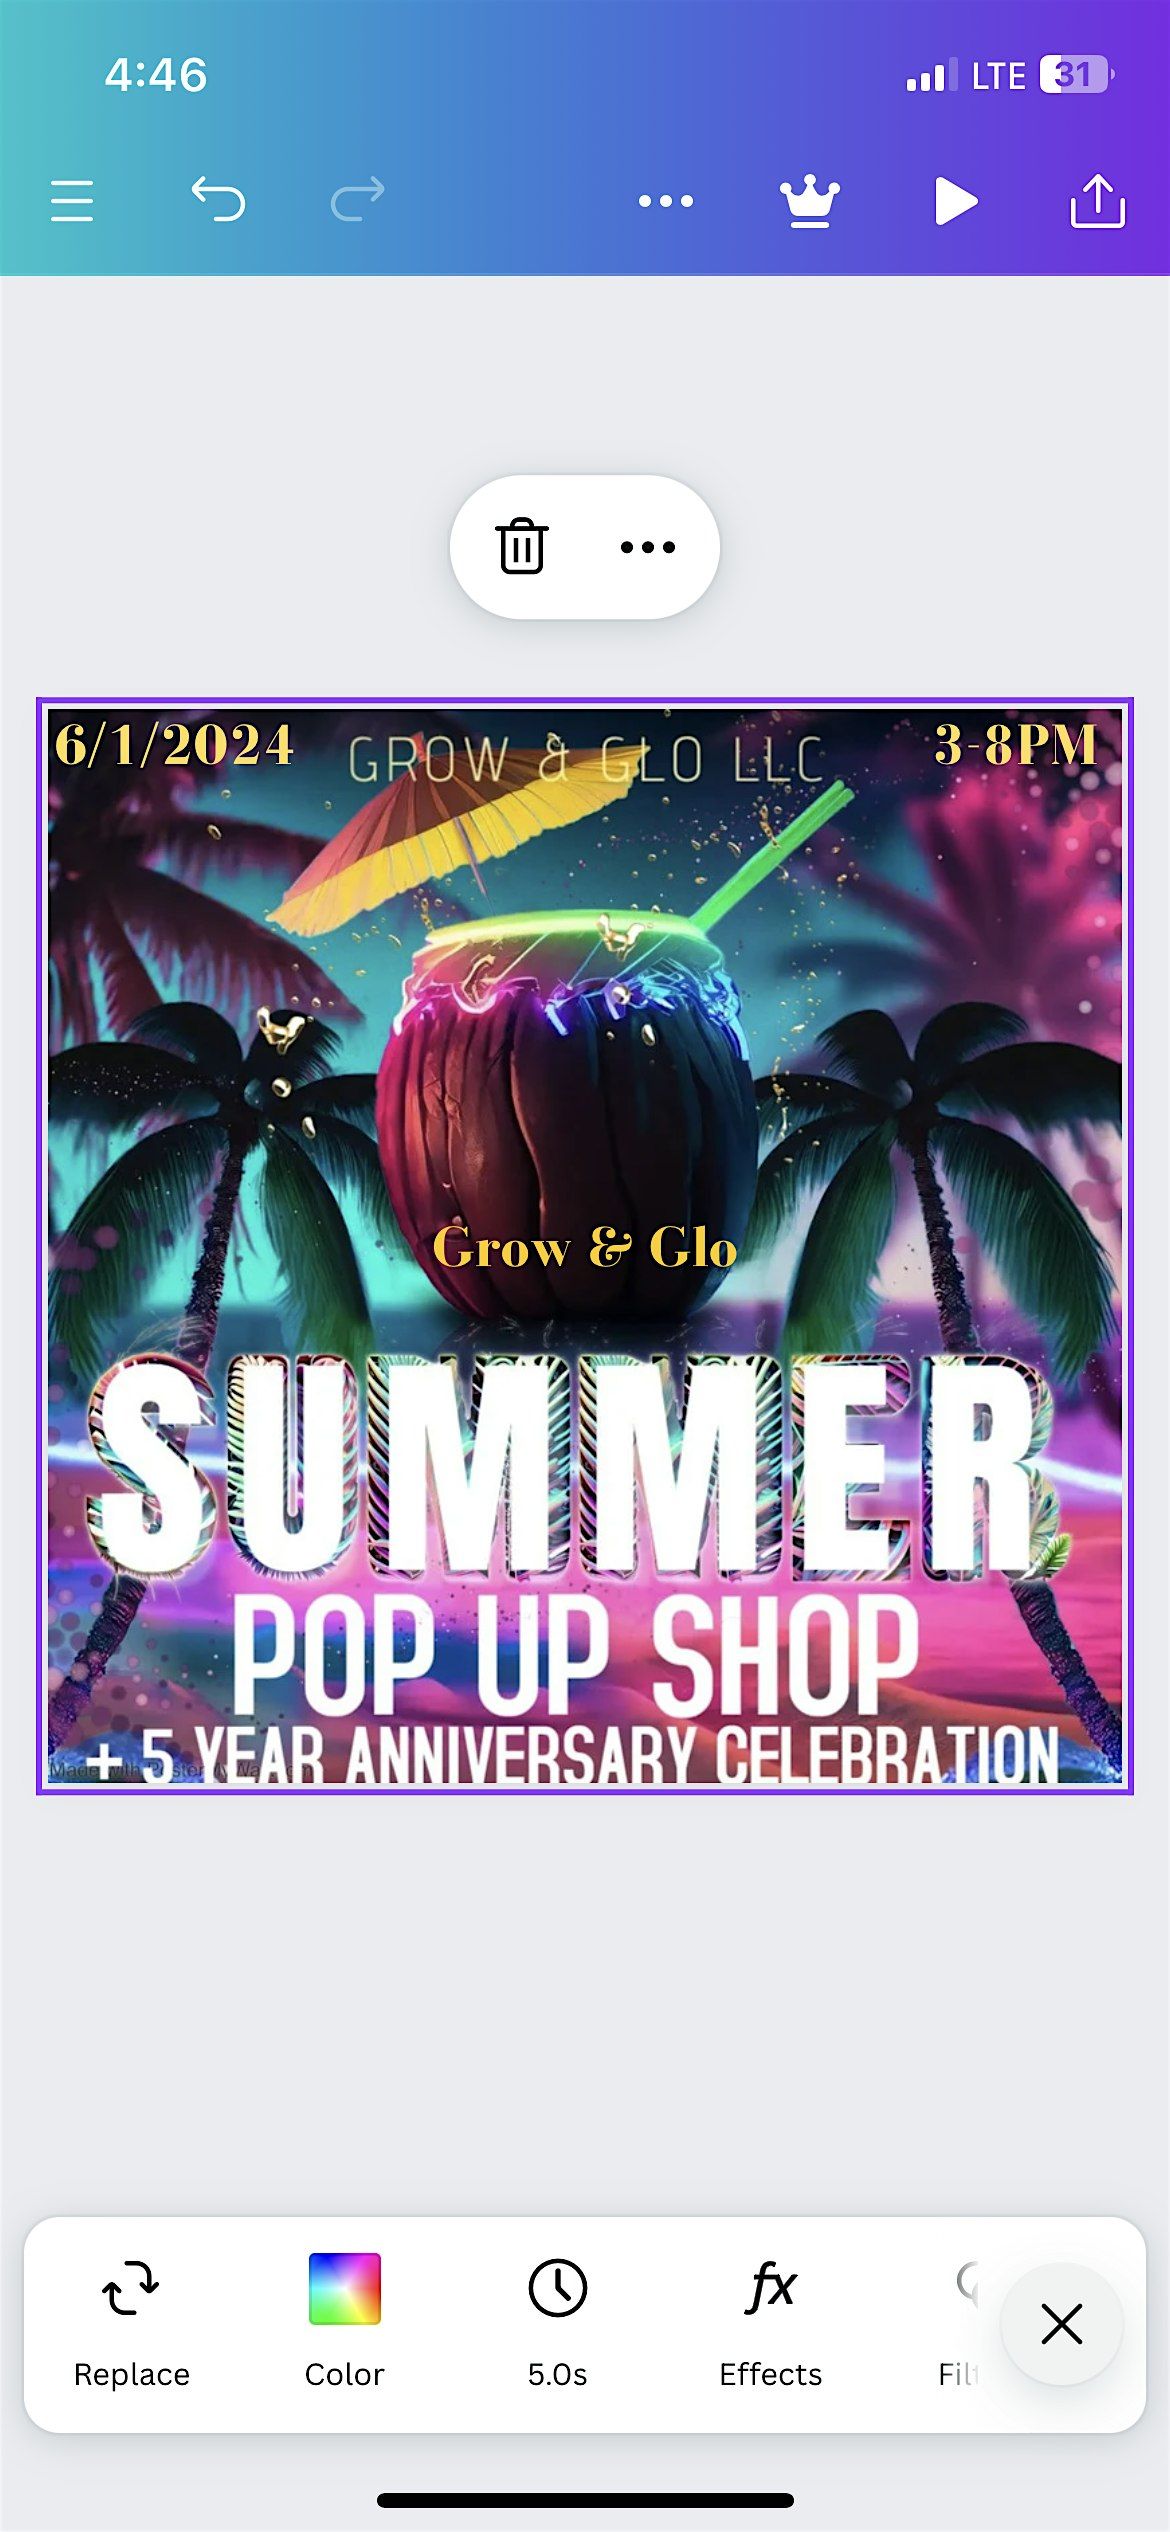 Grow & Glo 5th Anniversary Pop Up Party